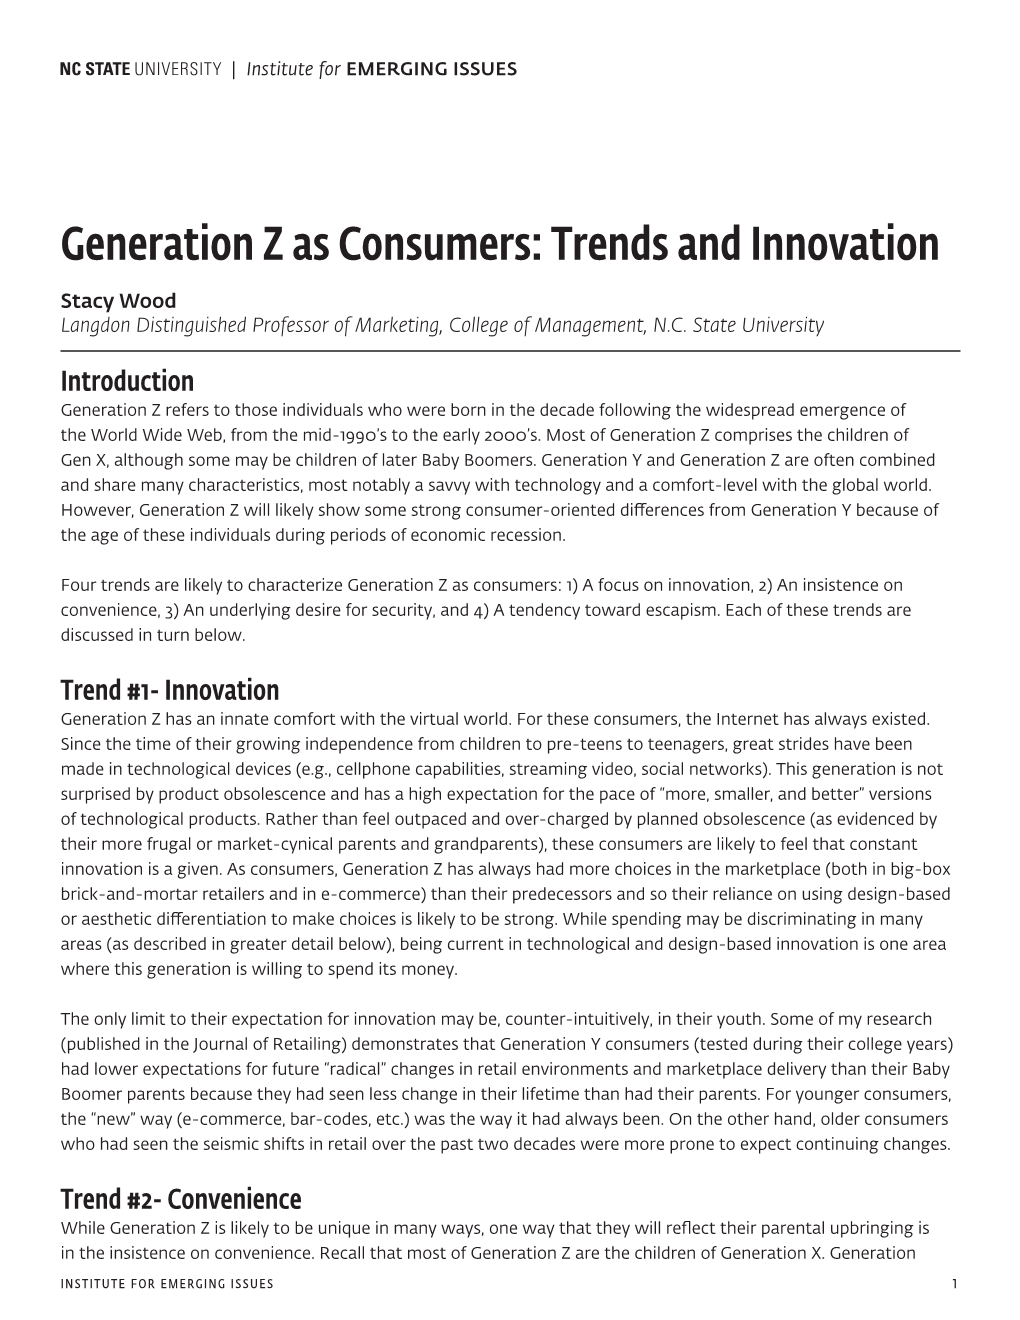 Generation Z As Consumers: Trends and Innovation